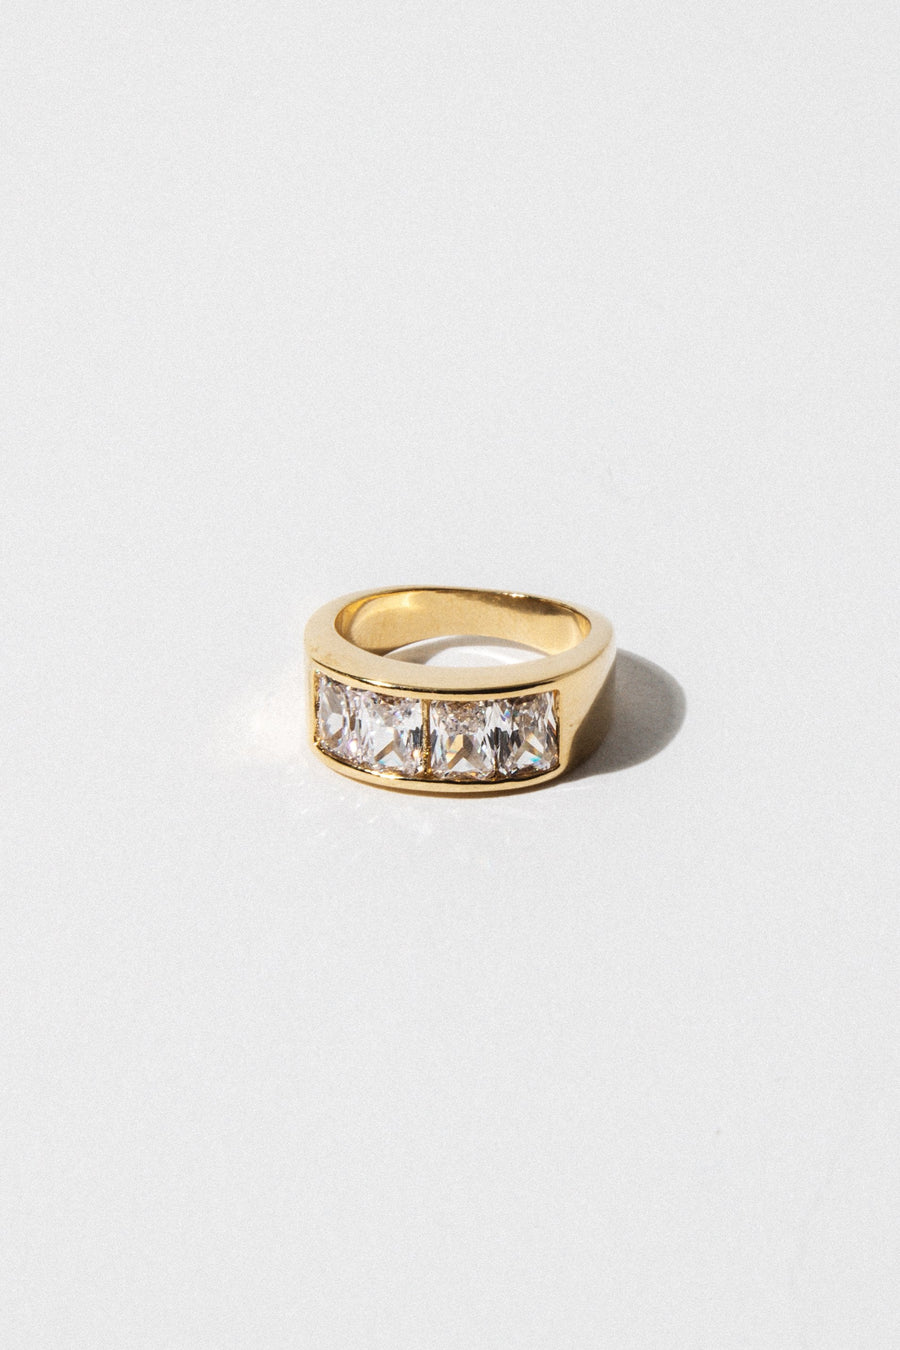 Sparrow Jewelry US 4 / Gold The Gaudy Ring